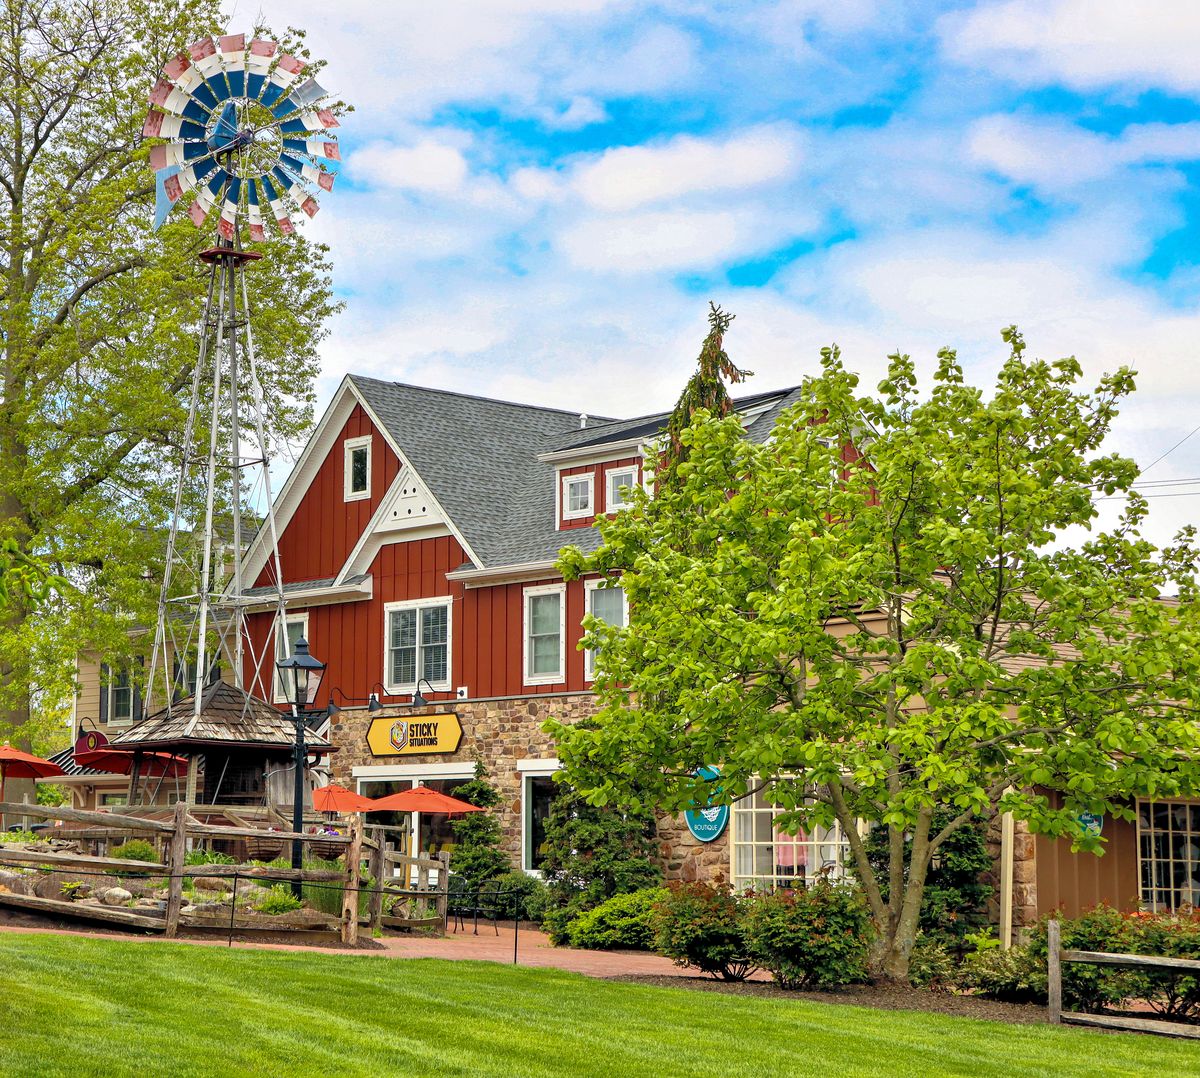 The windmill and shops of Peddler's Village in springtime